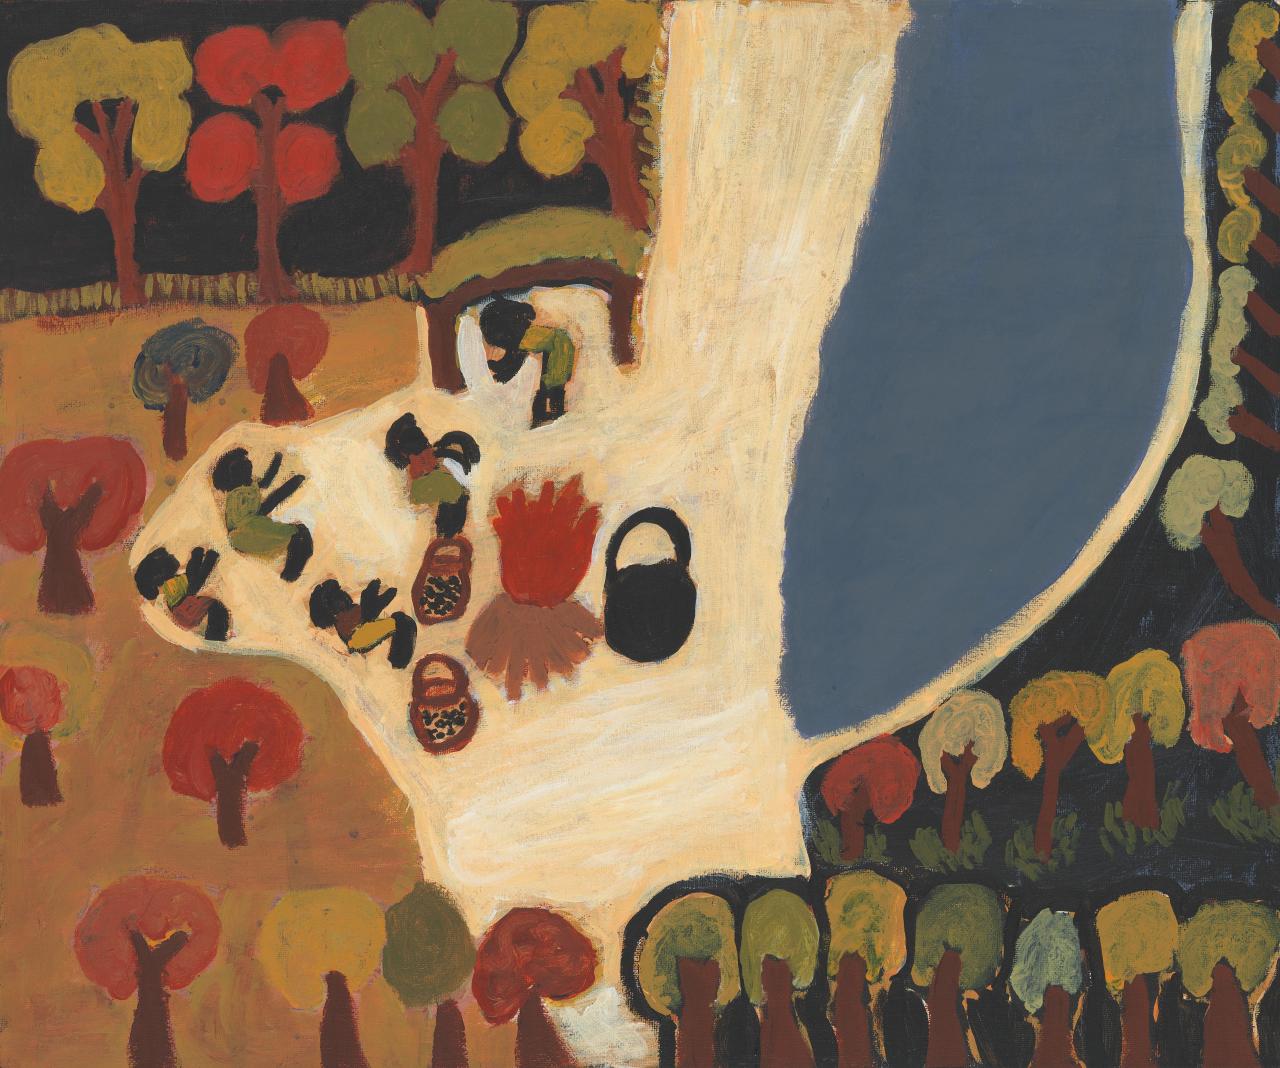  Rosemary Gutili,  Oysters at Second Creek,  synthetic polymer paint on canvas, 50.8 × 61 cm, 2010. (National Gallery of Victoria) 